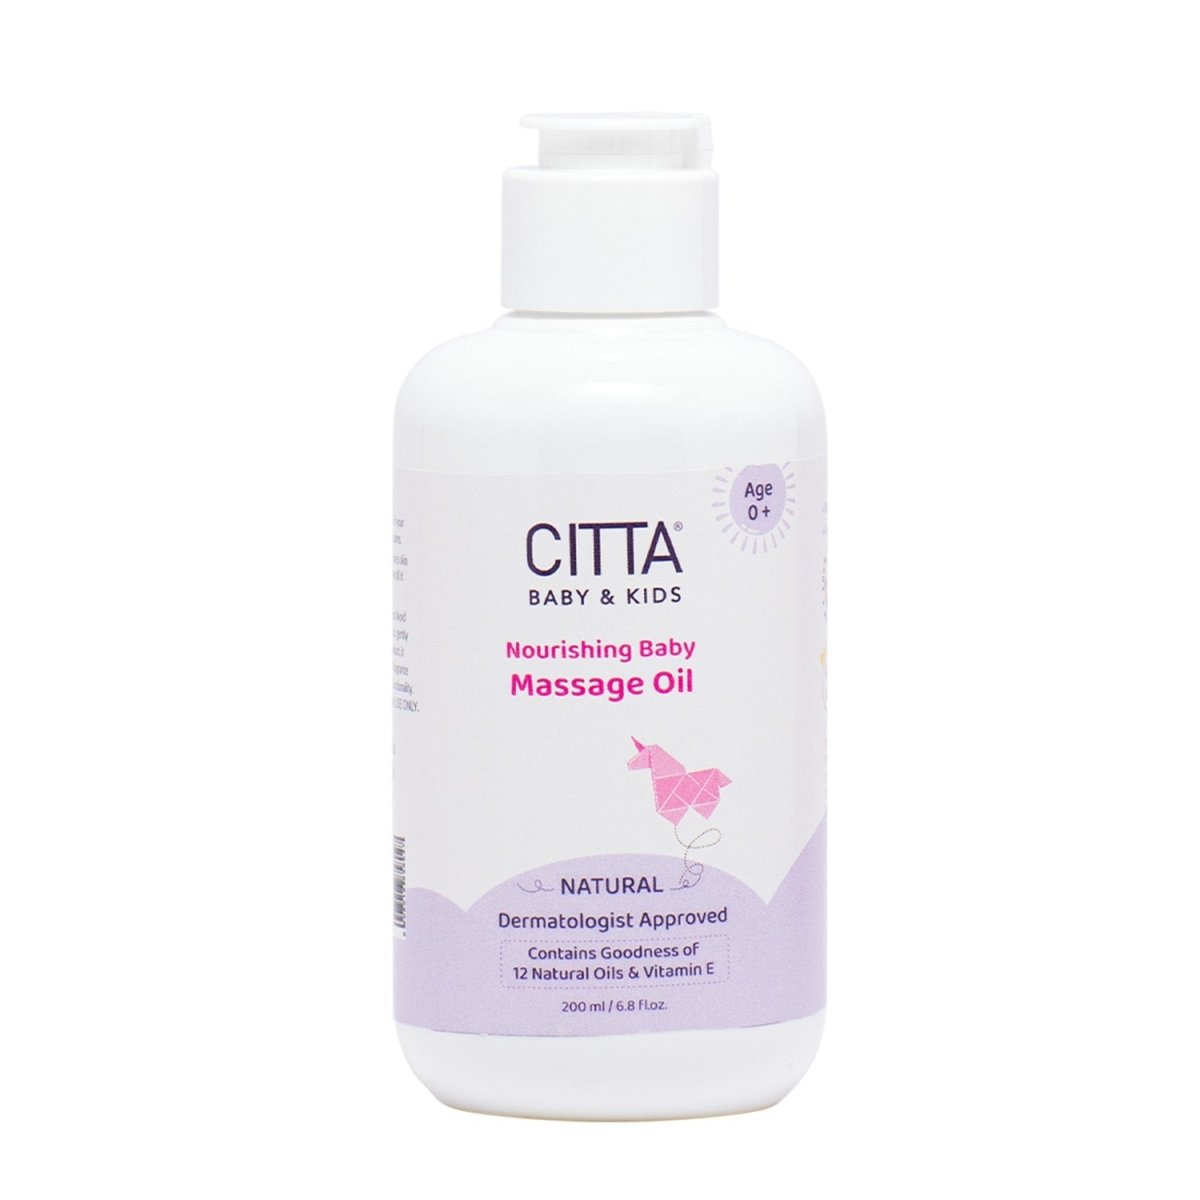 Citta Natural Nourishing Baby Massage Oil with Blend of 12 Oils and Vitamin E I Pack of 1 - 200 ml - B-Oil